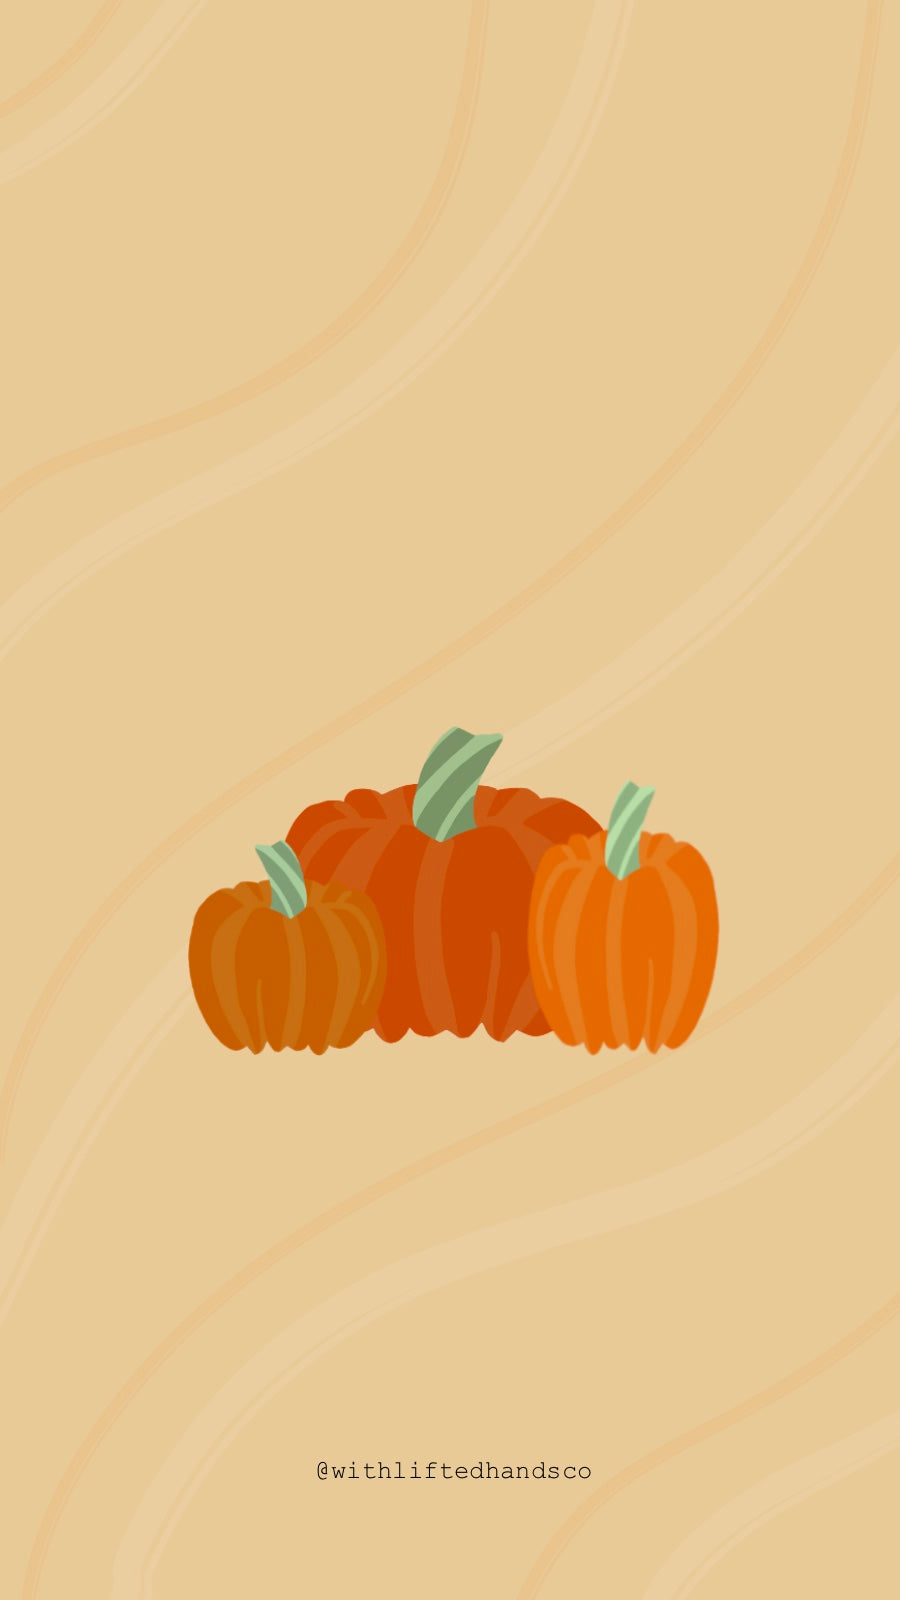 Pumpkins Faith phone wallpapers by with lifted hands co